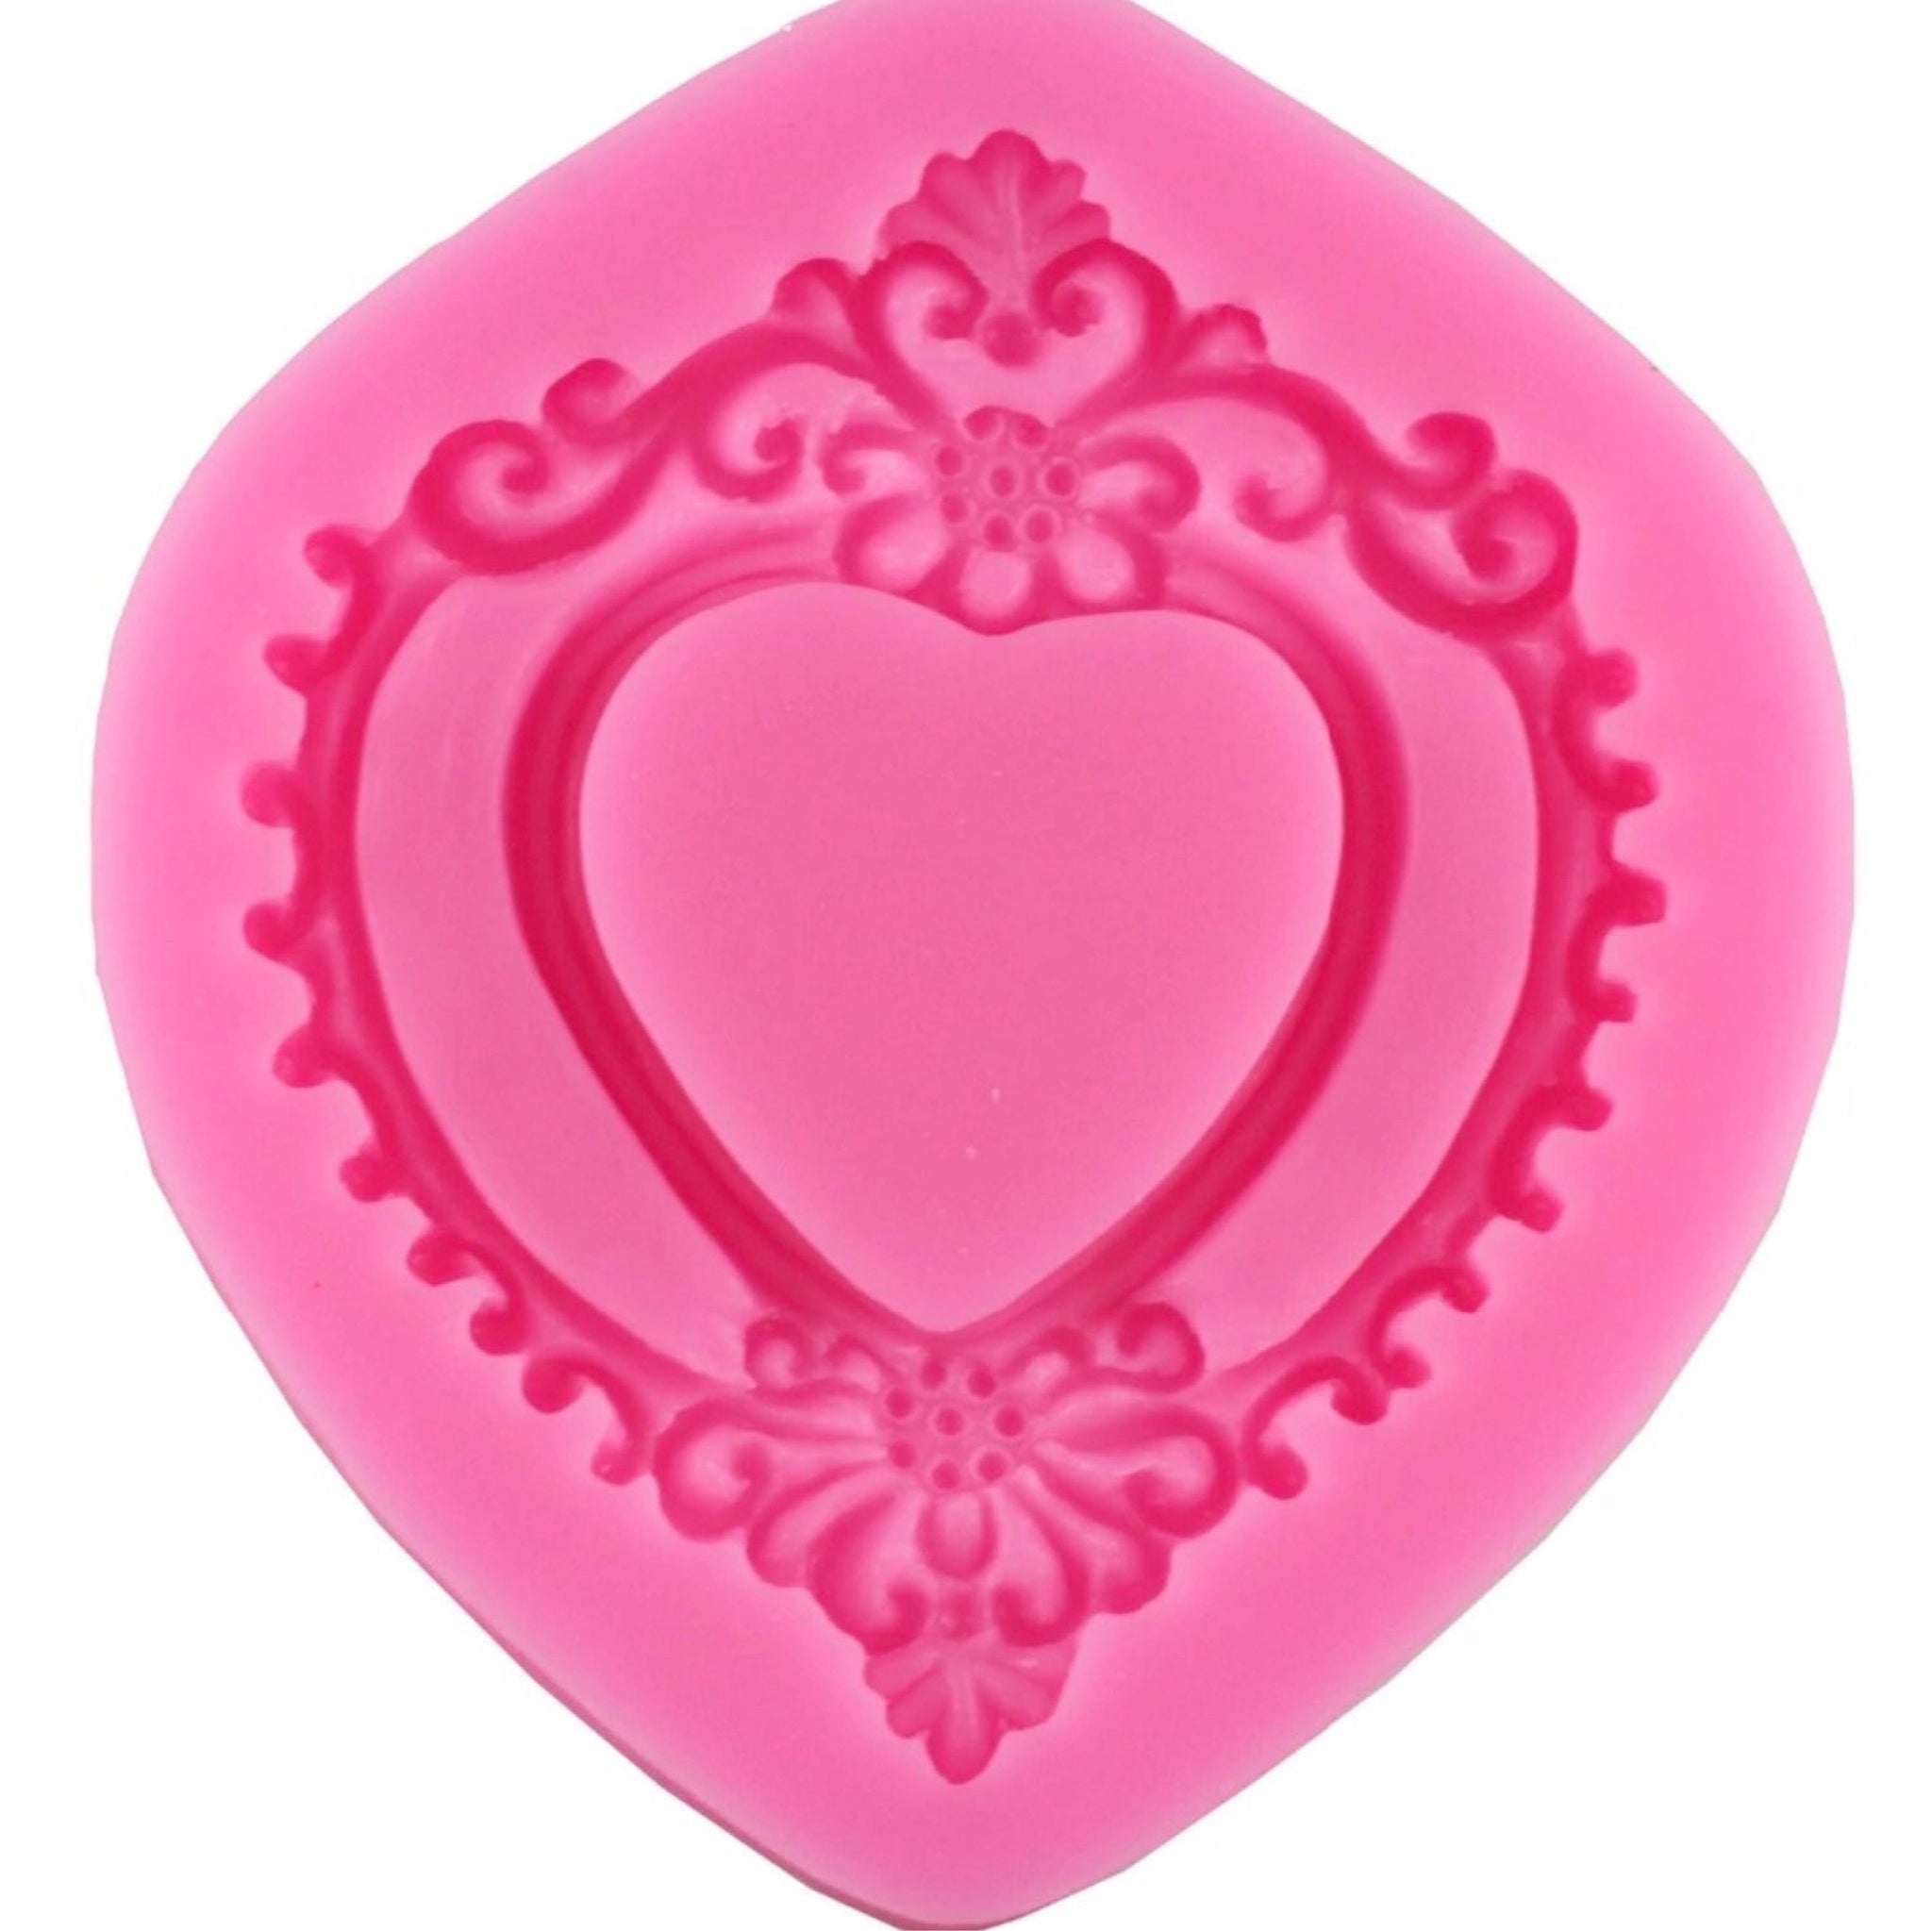 Vintage Love Heart Shape Mirror Frame 3D Silicone Mold